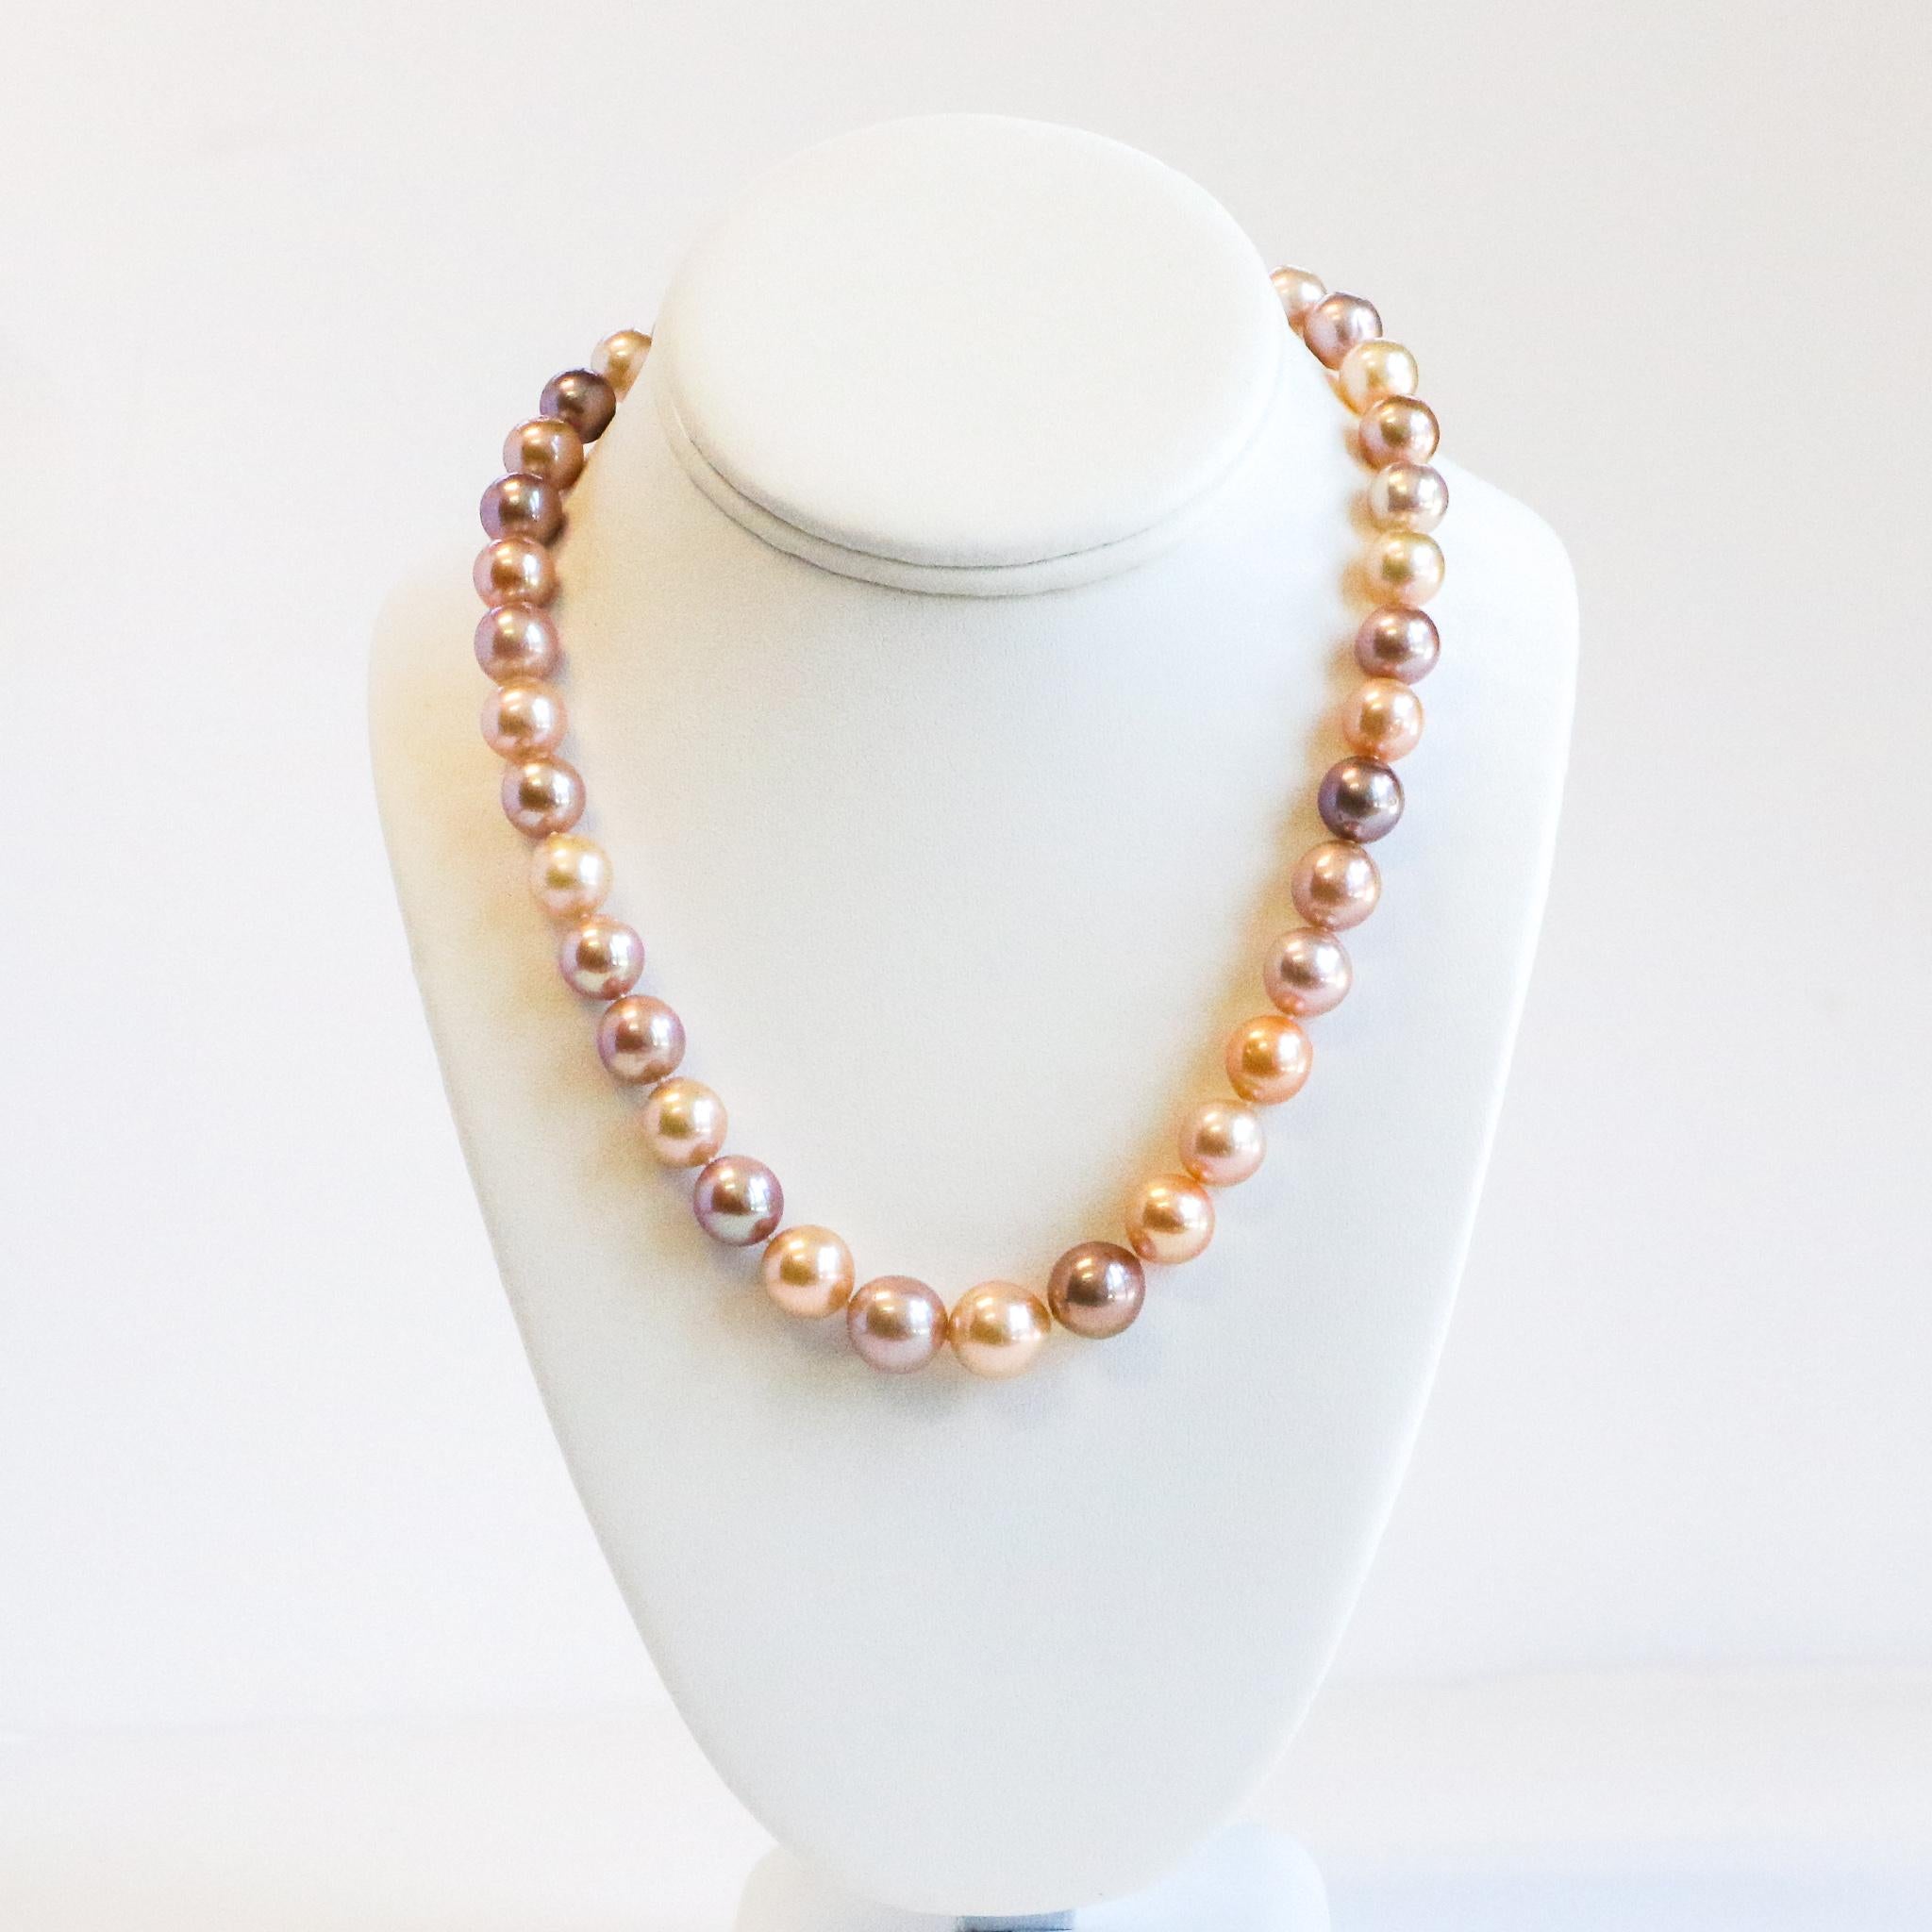 Women's Multi-coloured Pearl Necklace with White Sapphire Clasp